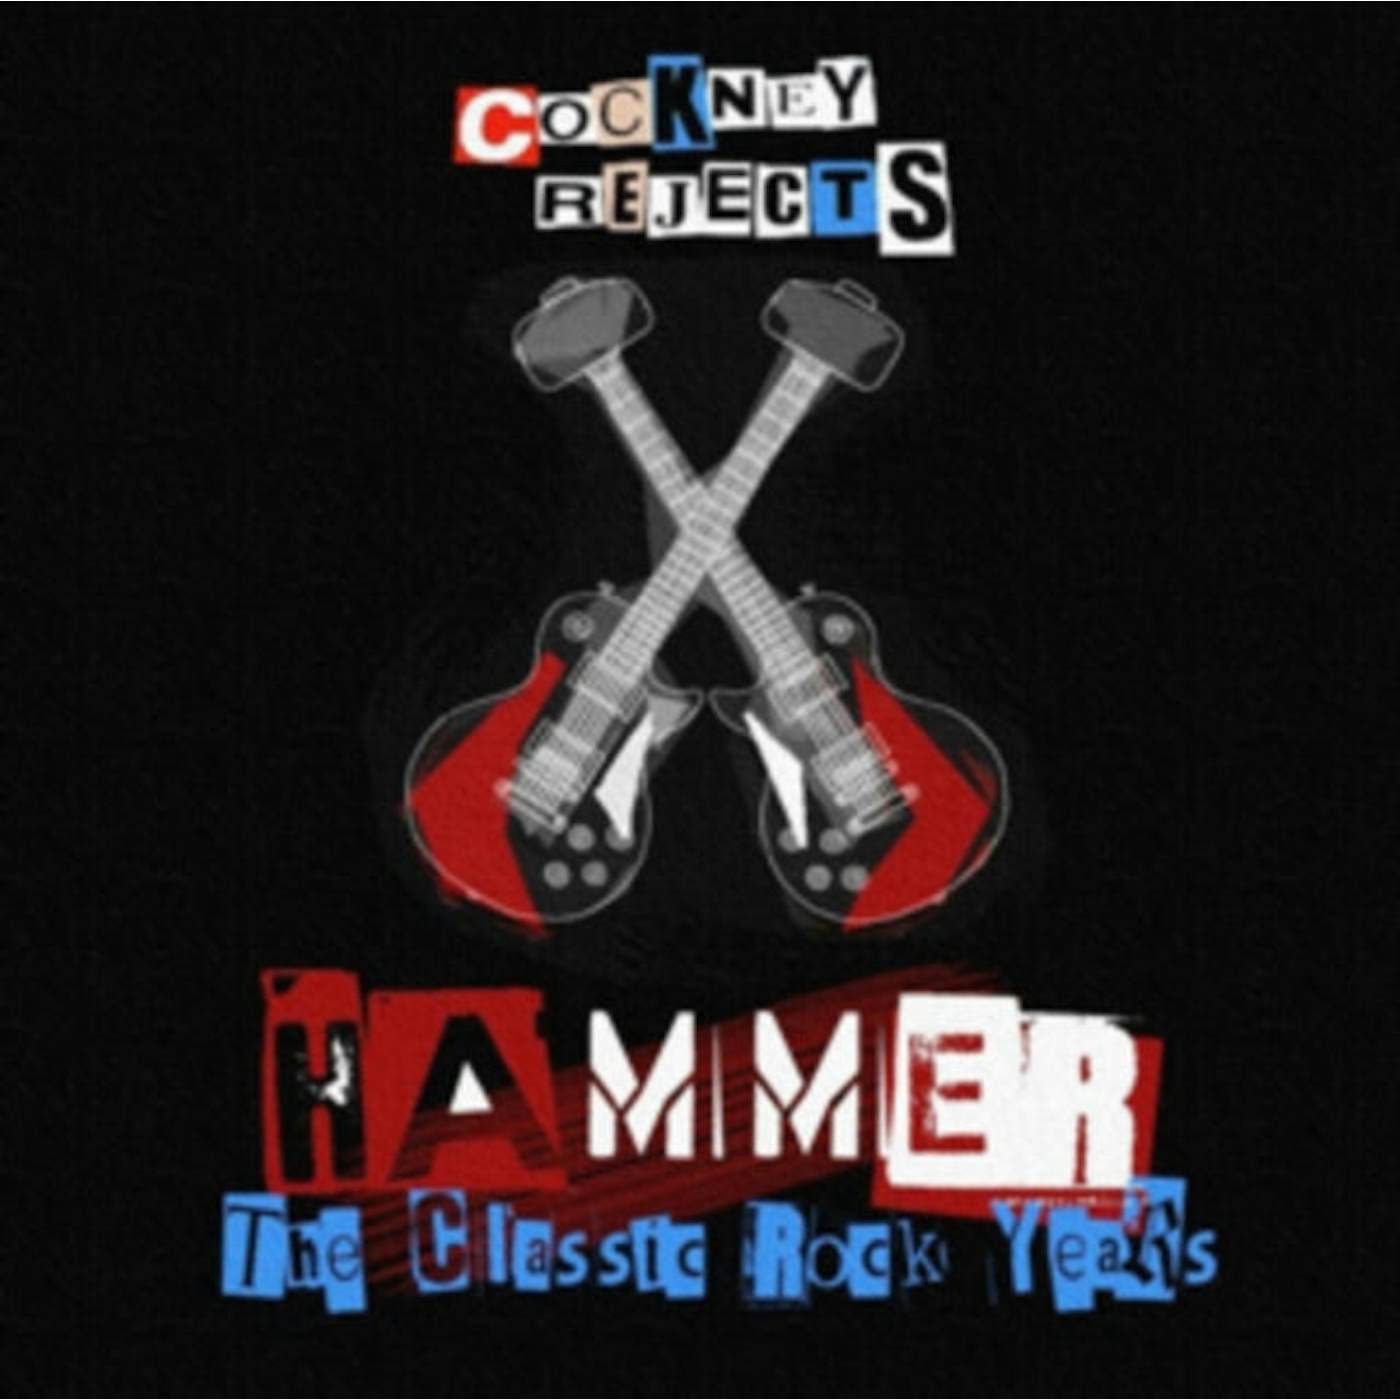 Cockney Rejects CD - Hammer - The Classic Rock Years